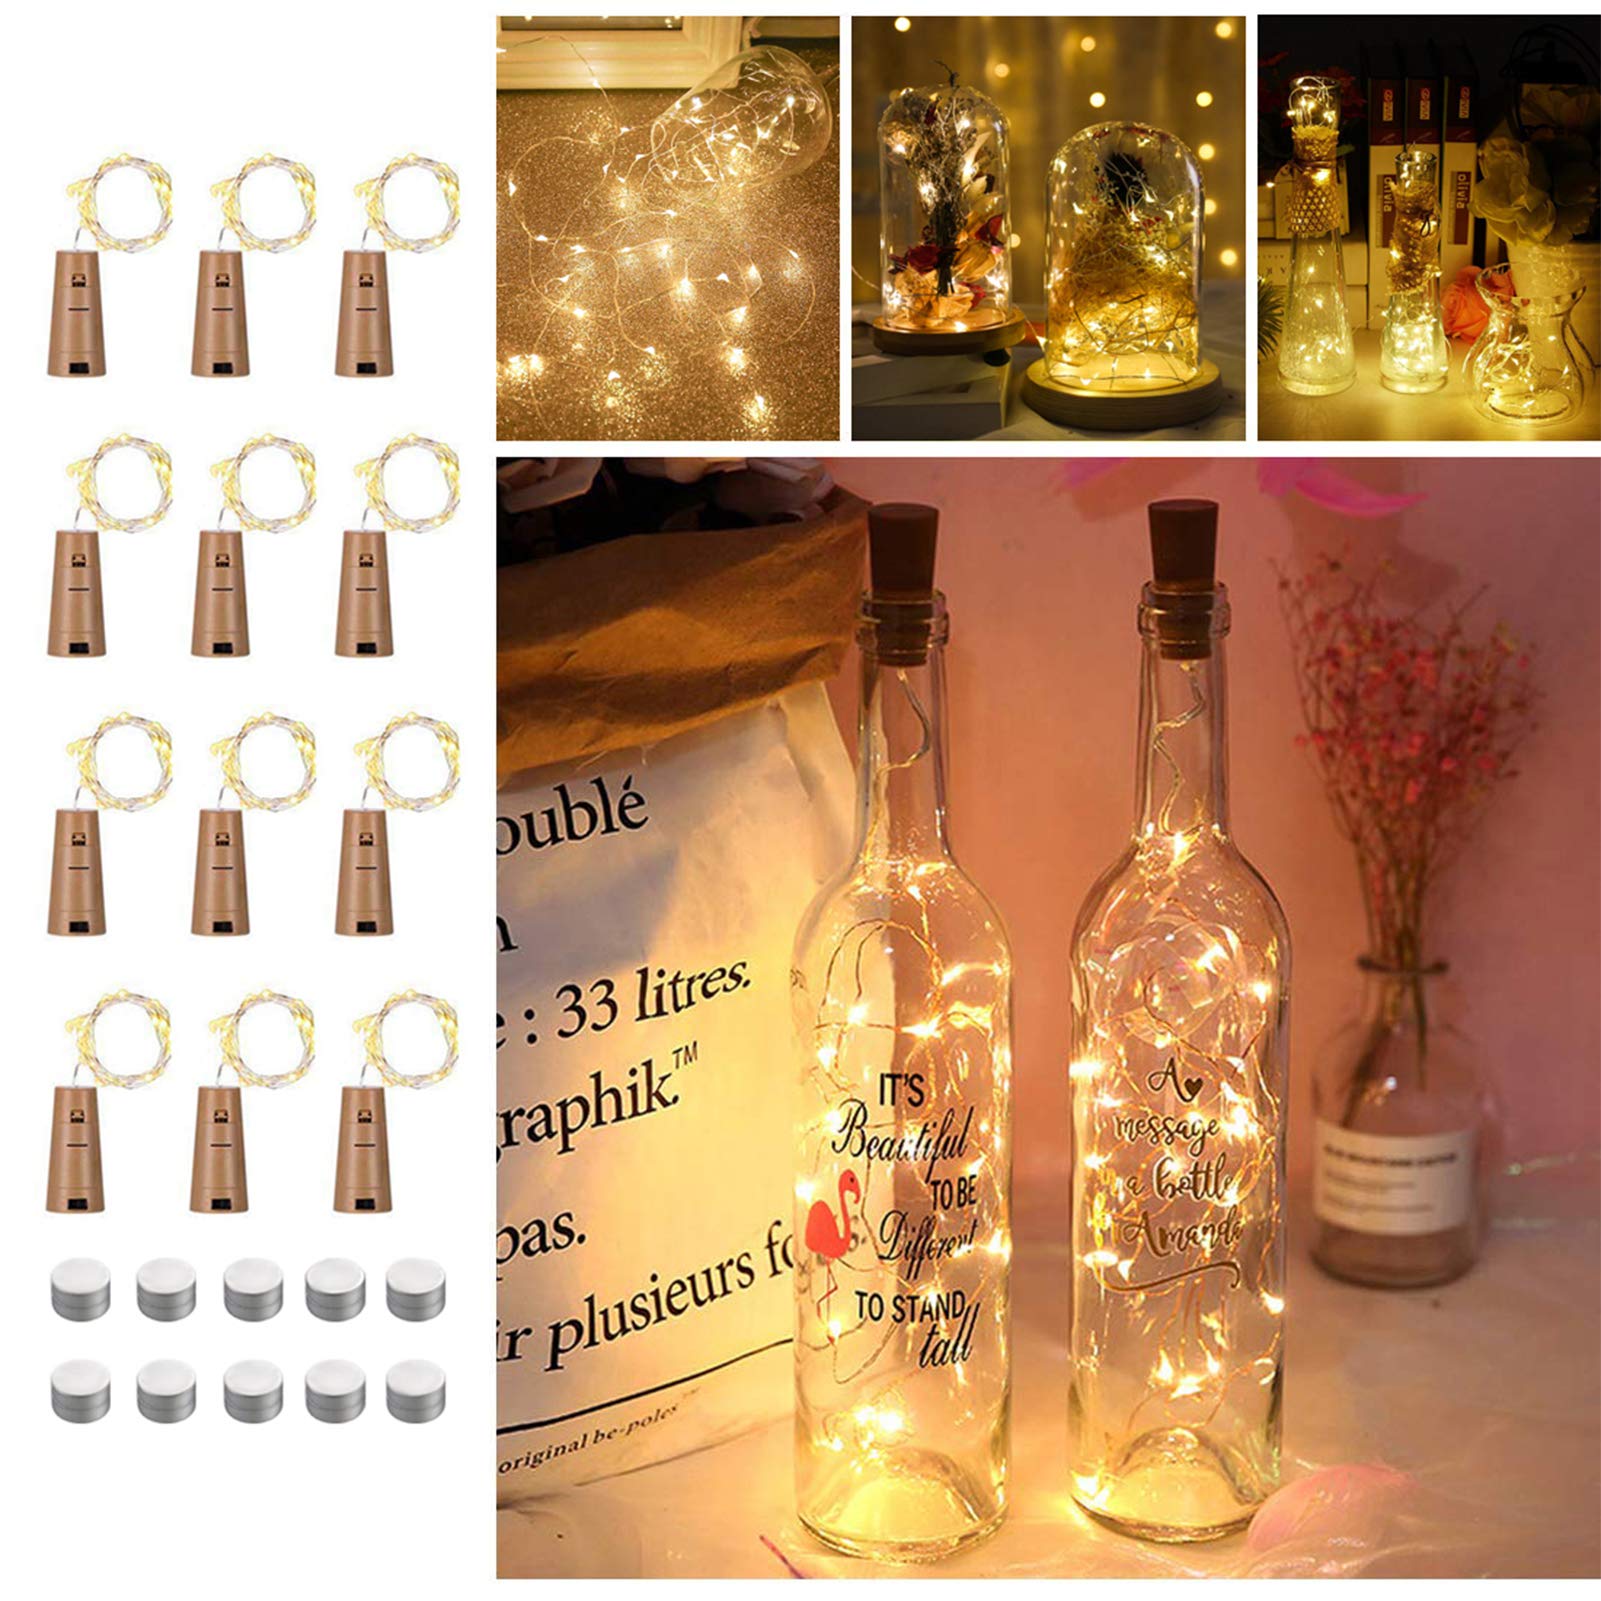 Bottle Lights with Cork 12 Pack Battery Operated 2M 20LEDs Copper Wire Cork Lights for Bottles Indoor Outdoor Decoration (Warm White, 12 Pack)